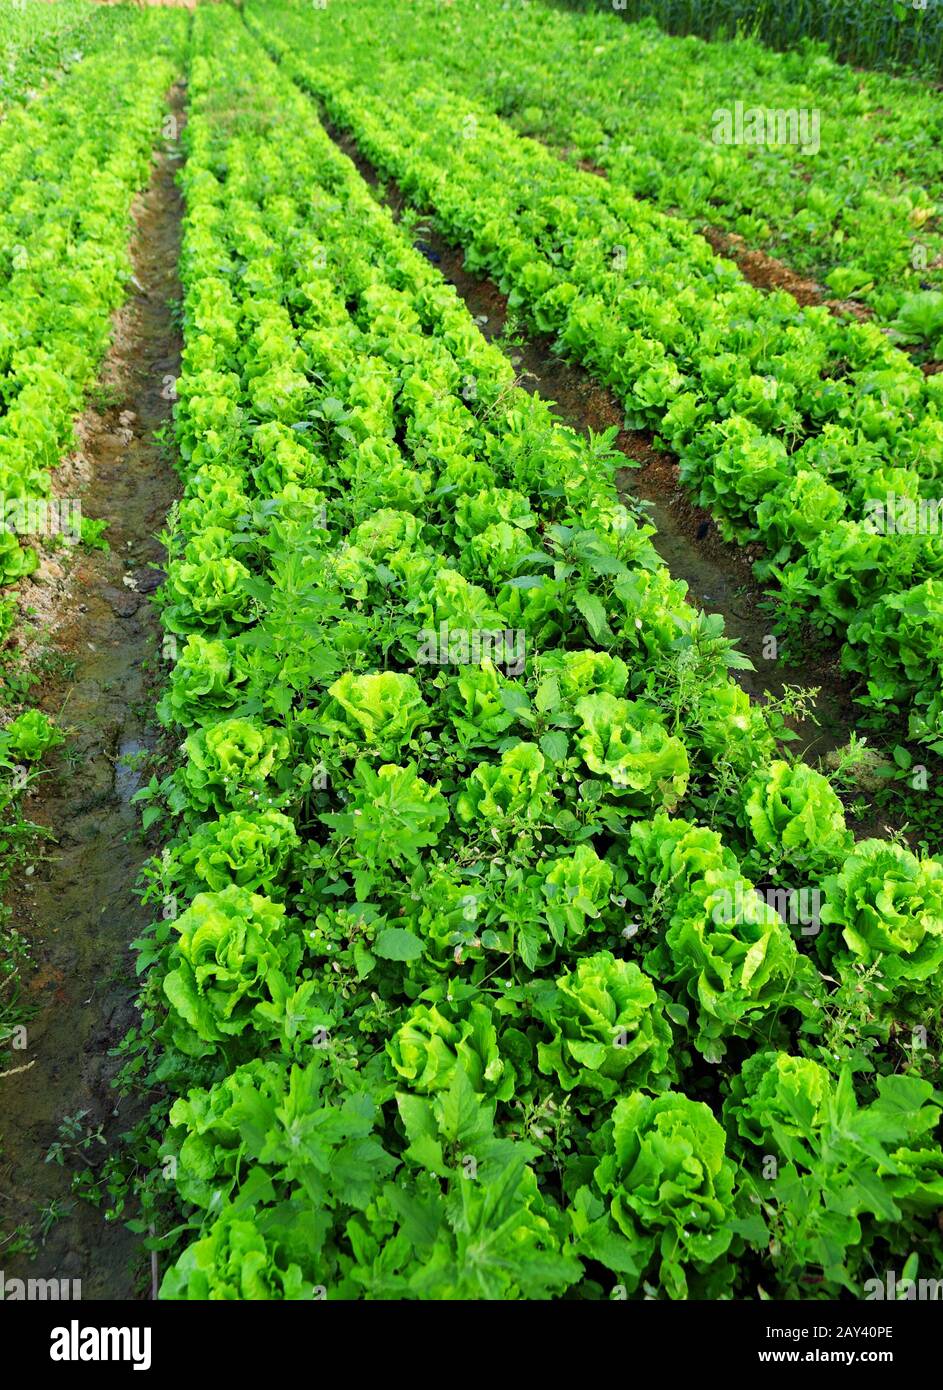 Cultivated land Stock Photo